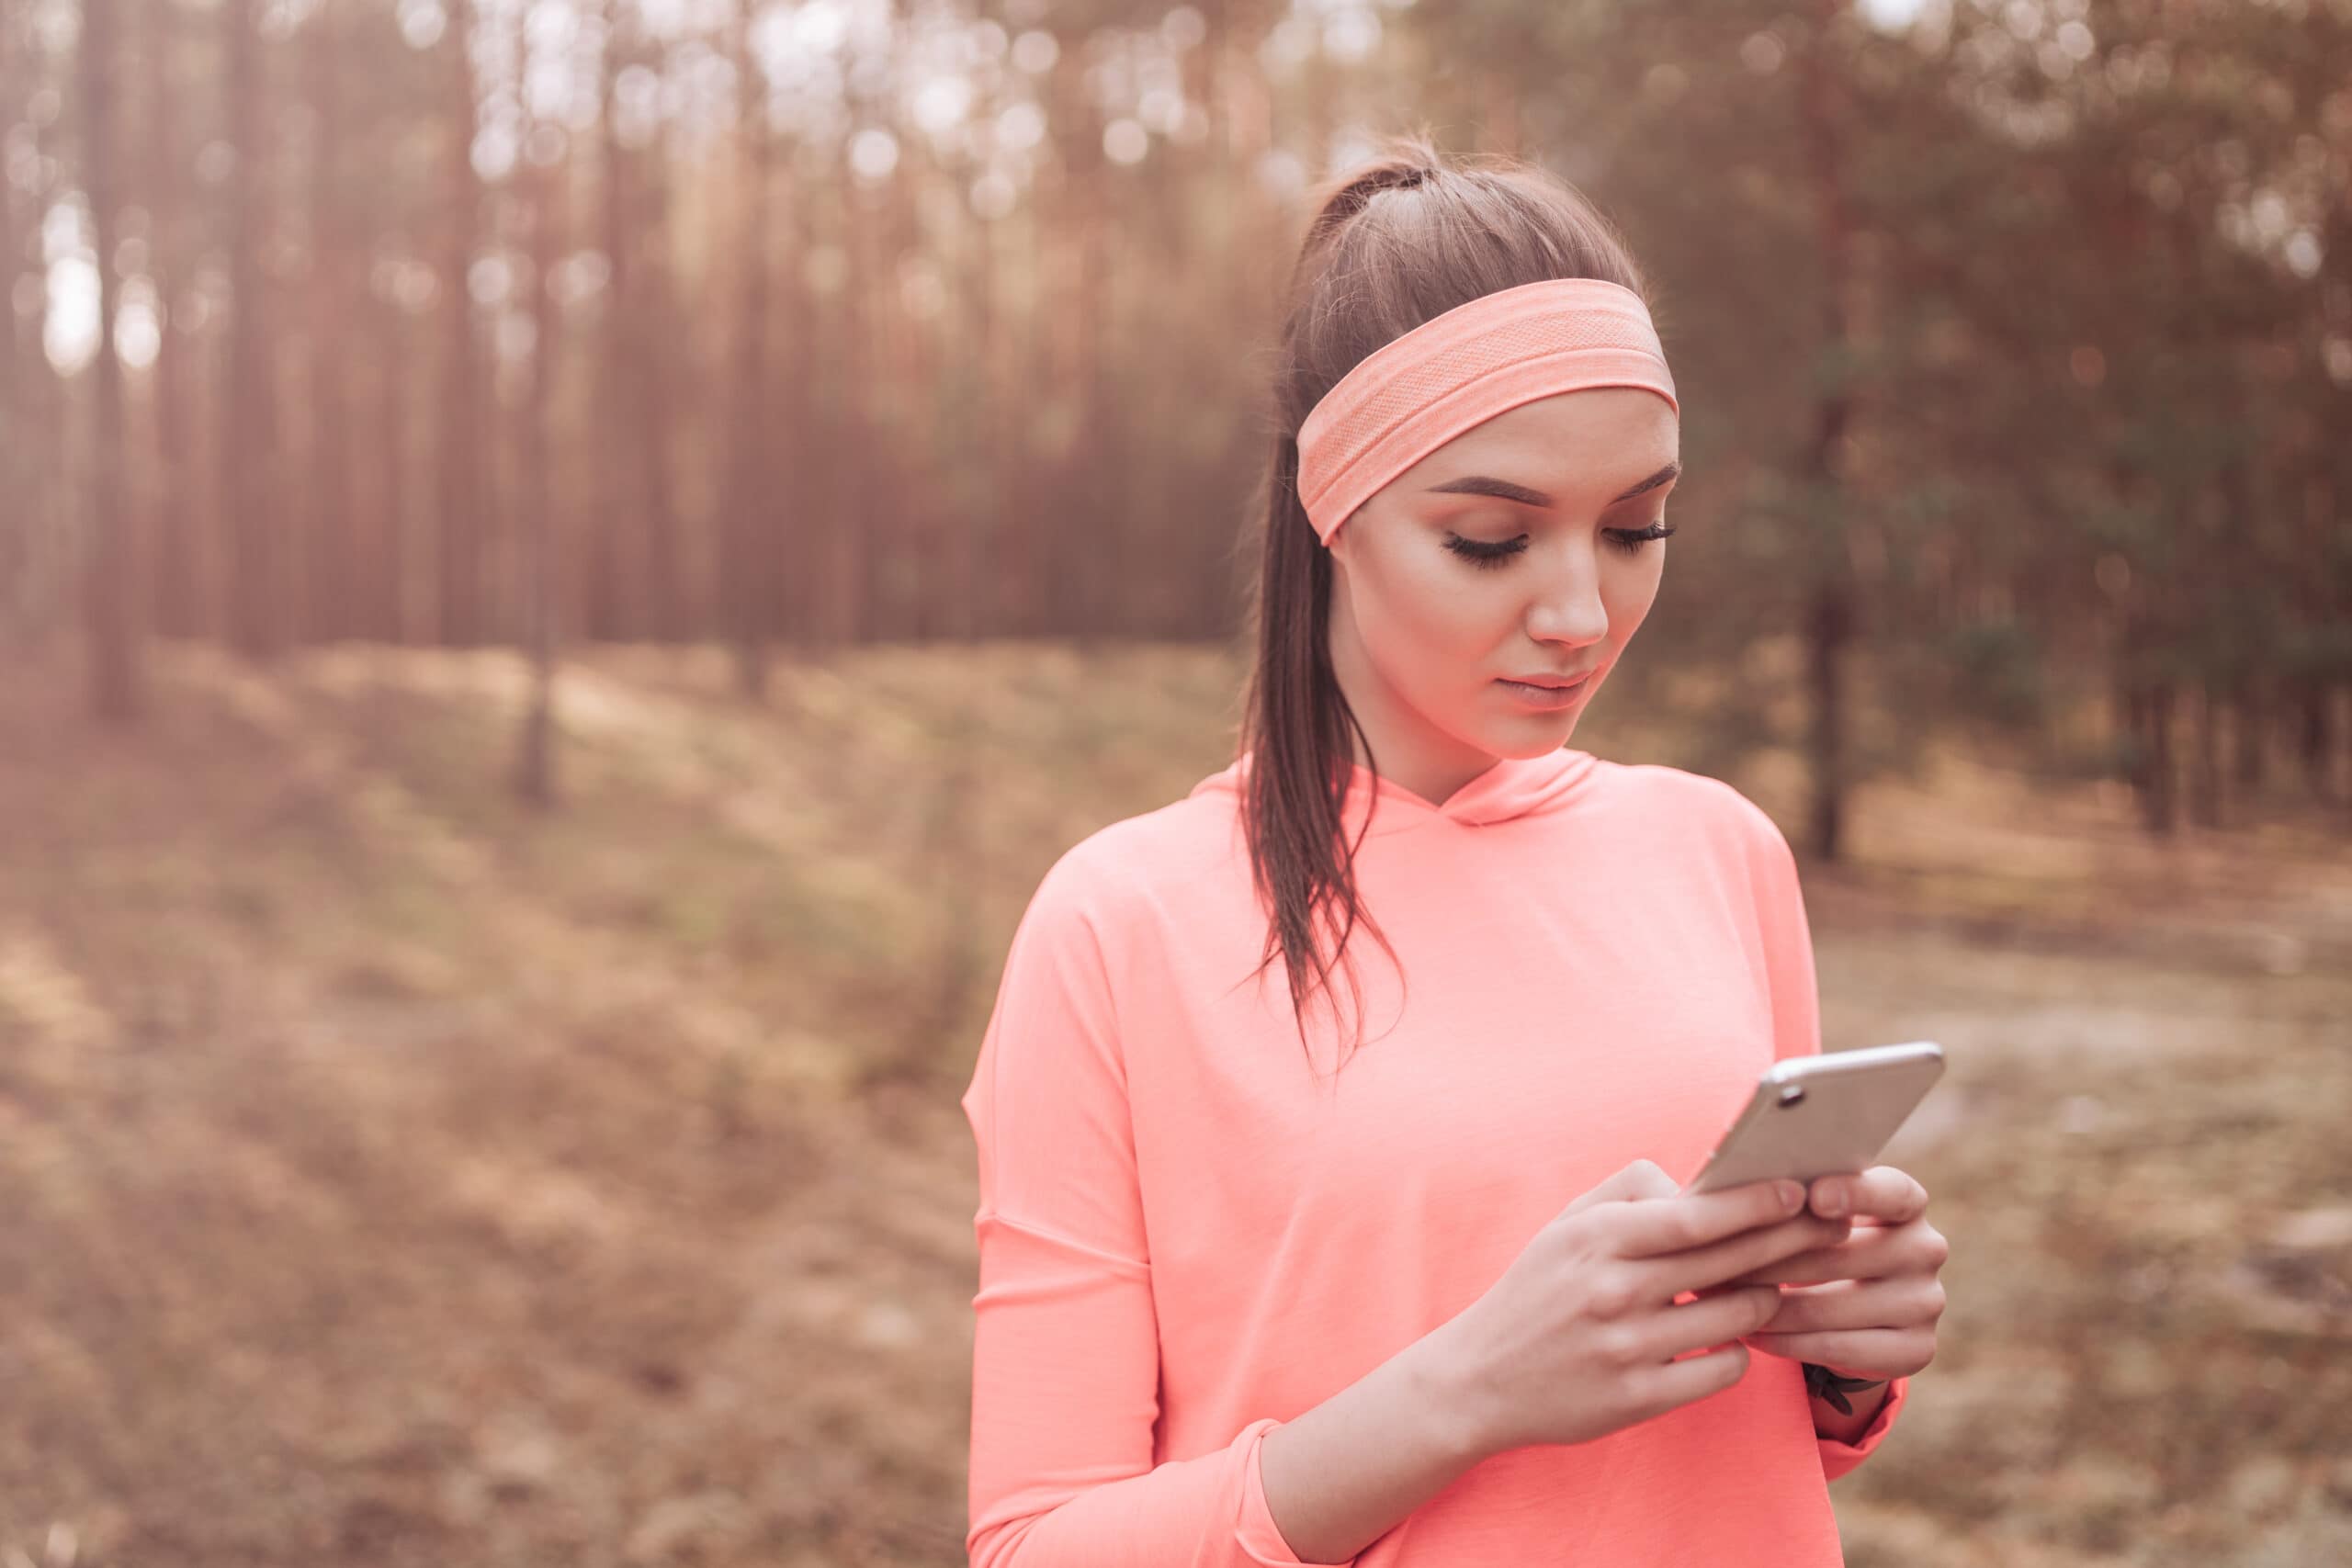 A young woman with a ponytail checks her phone whilst walking through a forest.